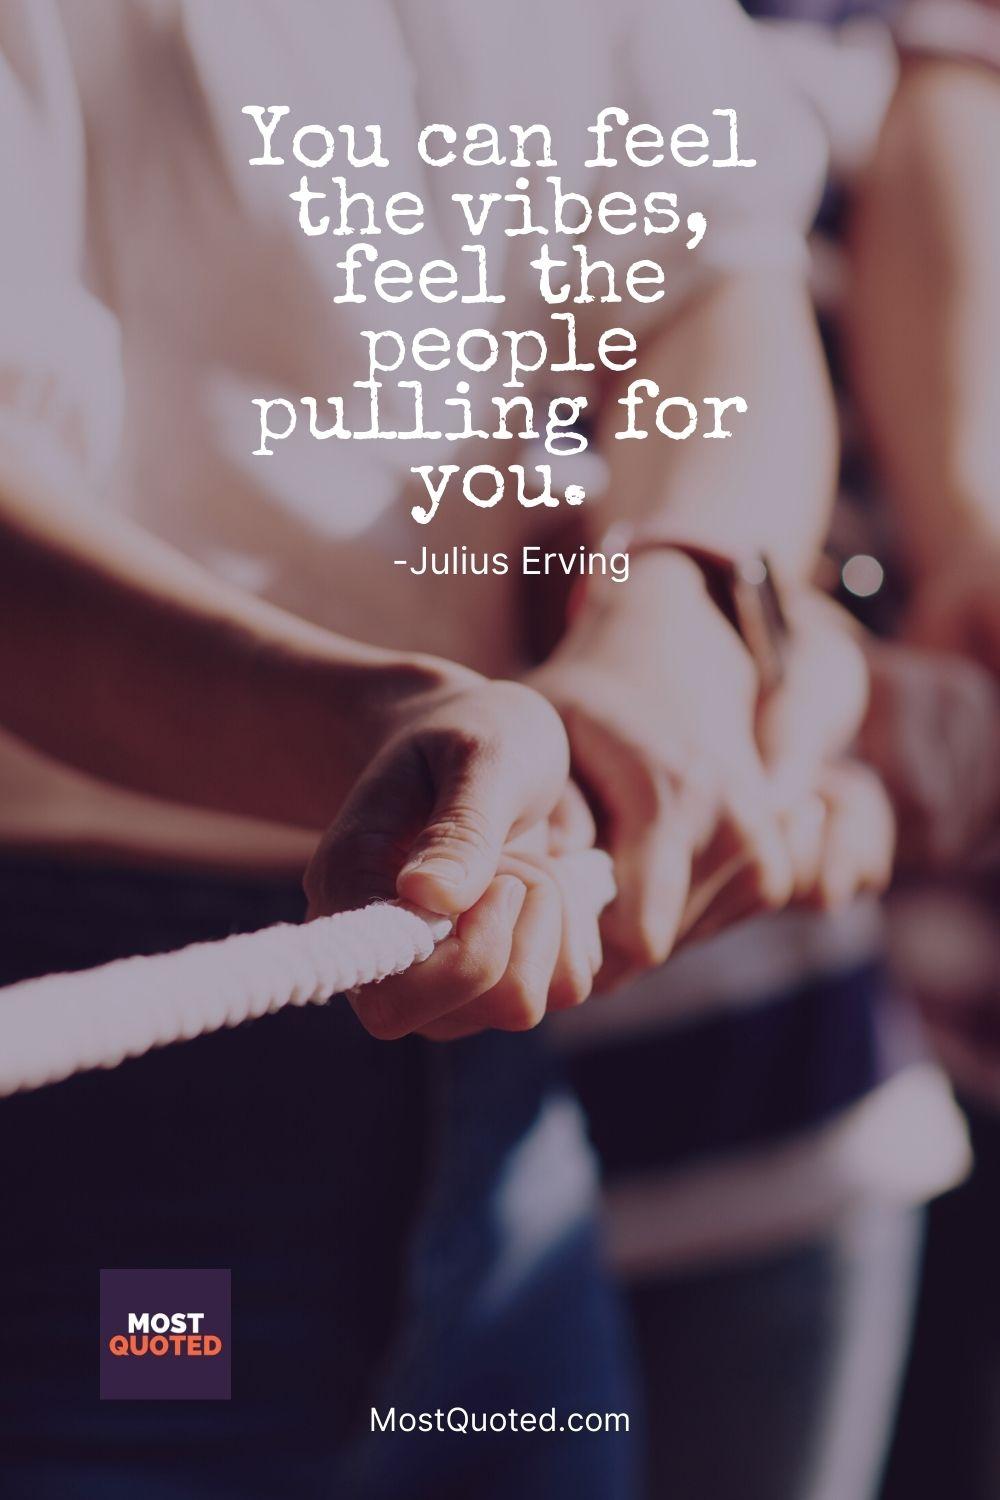 You can feel the vibes, feel the people pulling for you. - Julius Erving